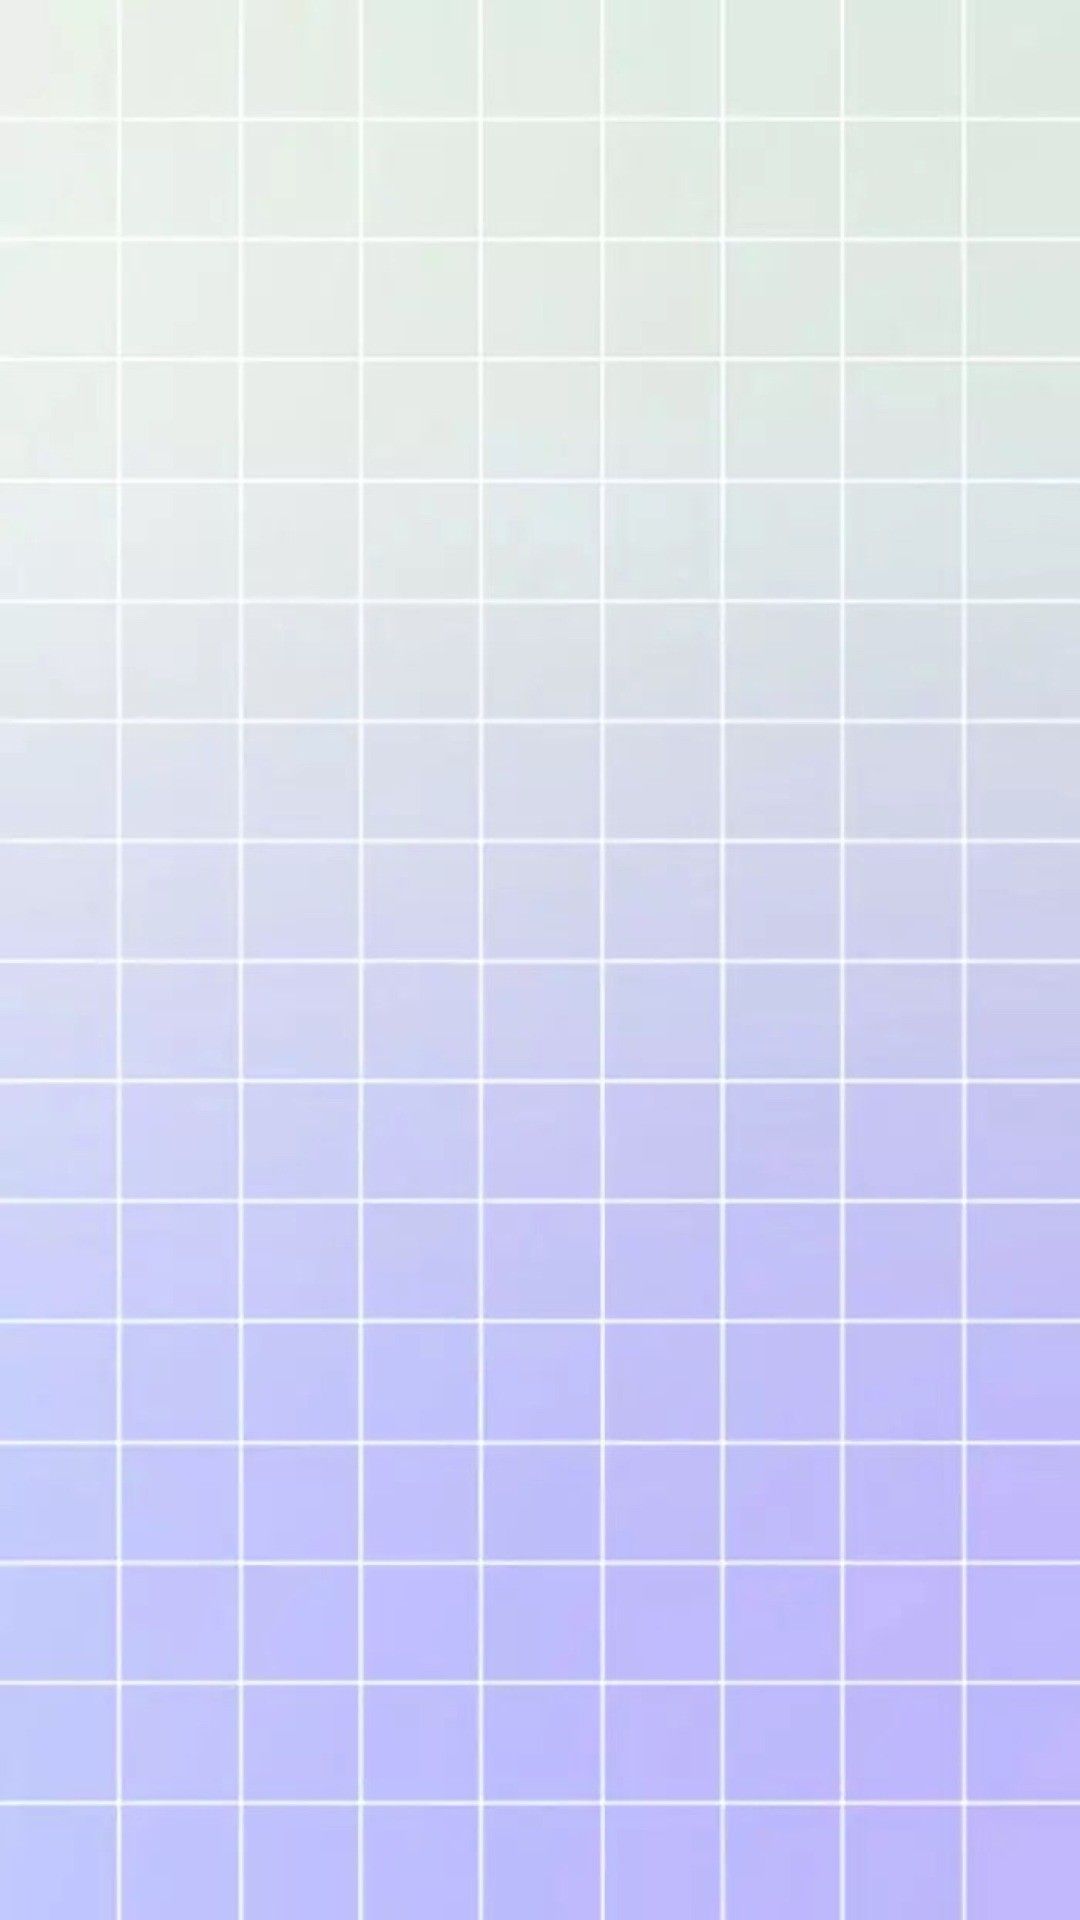 Aesthetic phone background with a grid of squares in blue and purple. - Grid, pastel minimalist